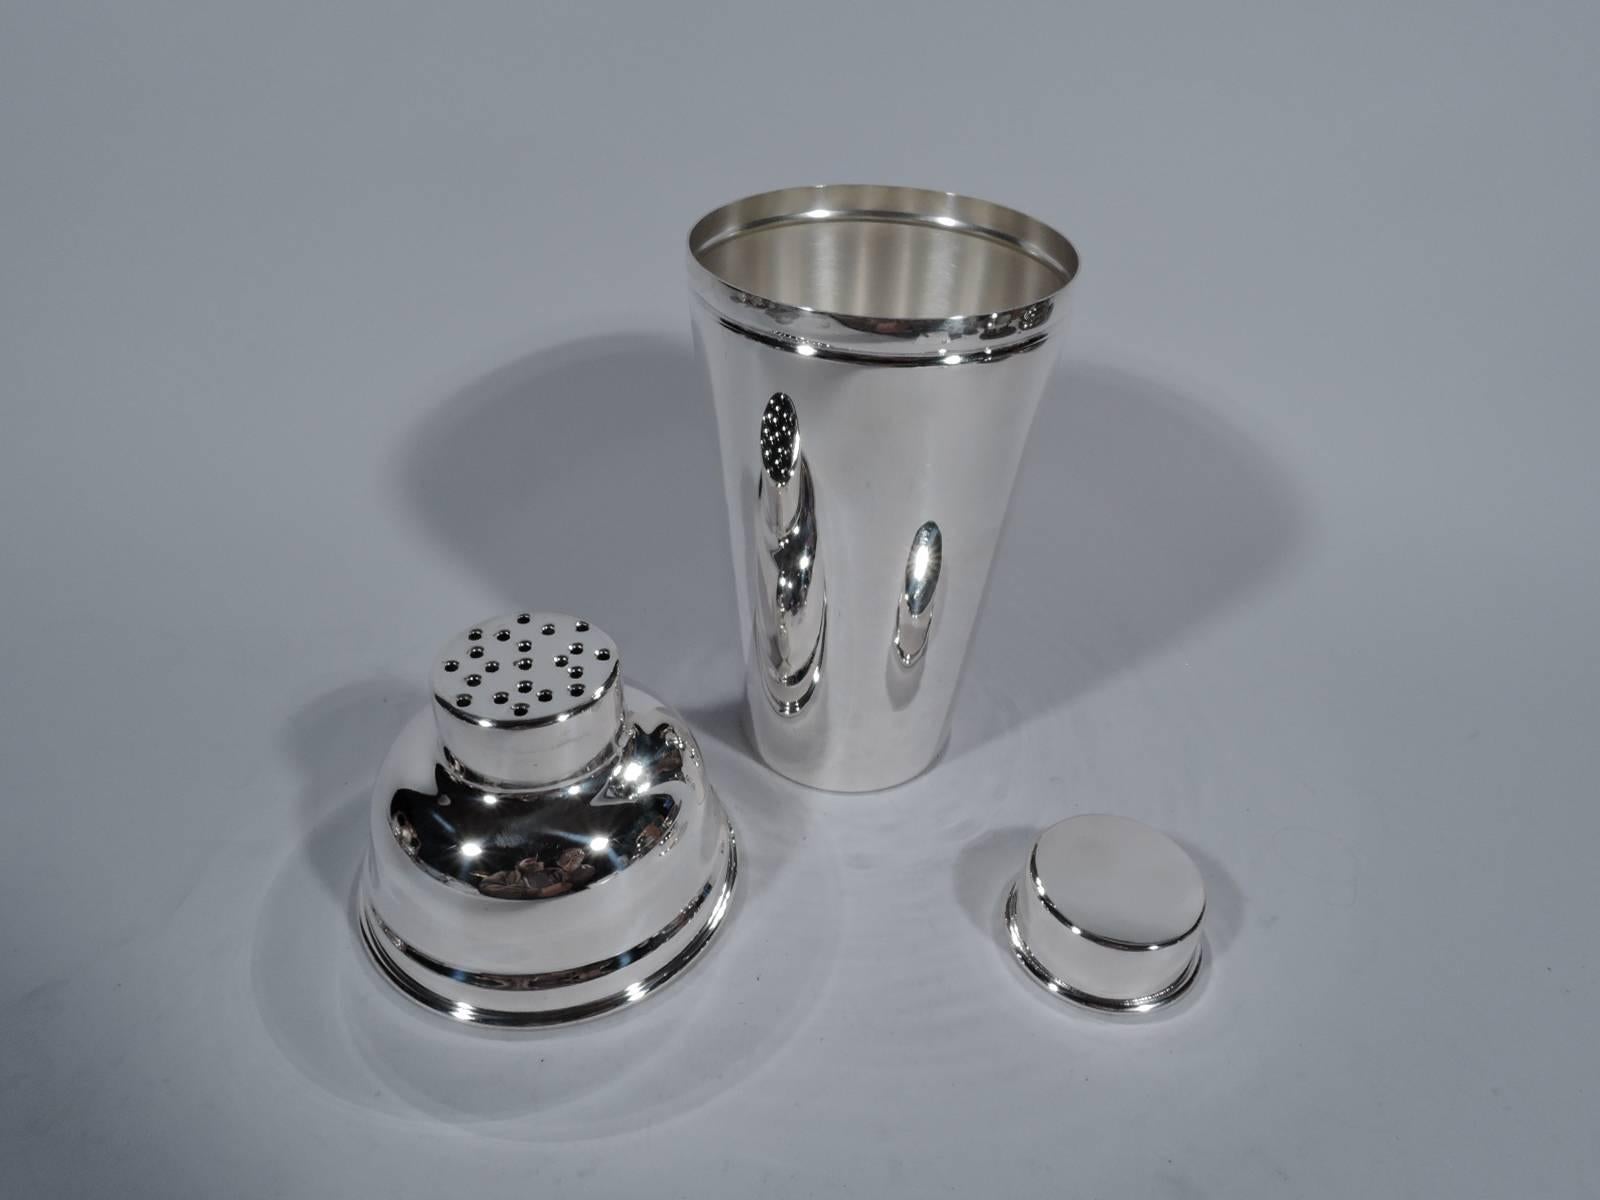 American Modern sterling silver cocktail Shaker. Straight and tapering sides surmounted by dome with short neck and snug CAP. Mouth has pierced built-in strainer. Hallmarked Manchester, a twentieth-century Providence maker. Hallmark includes no.